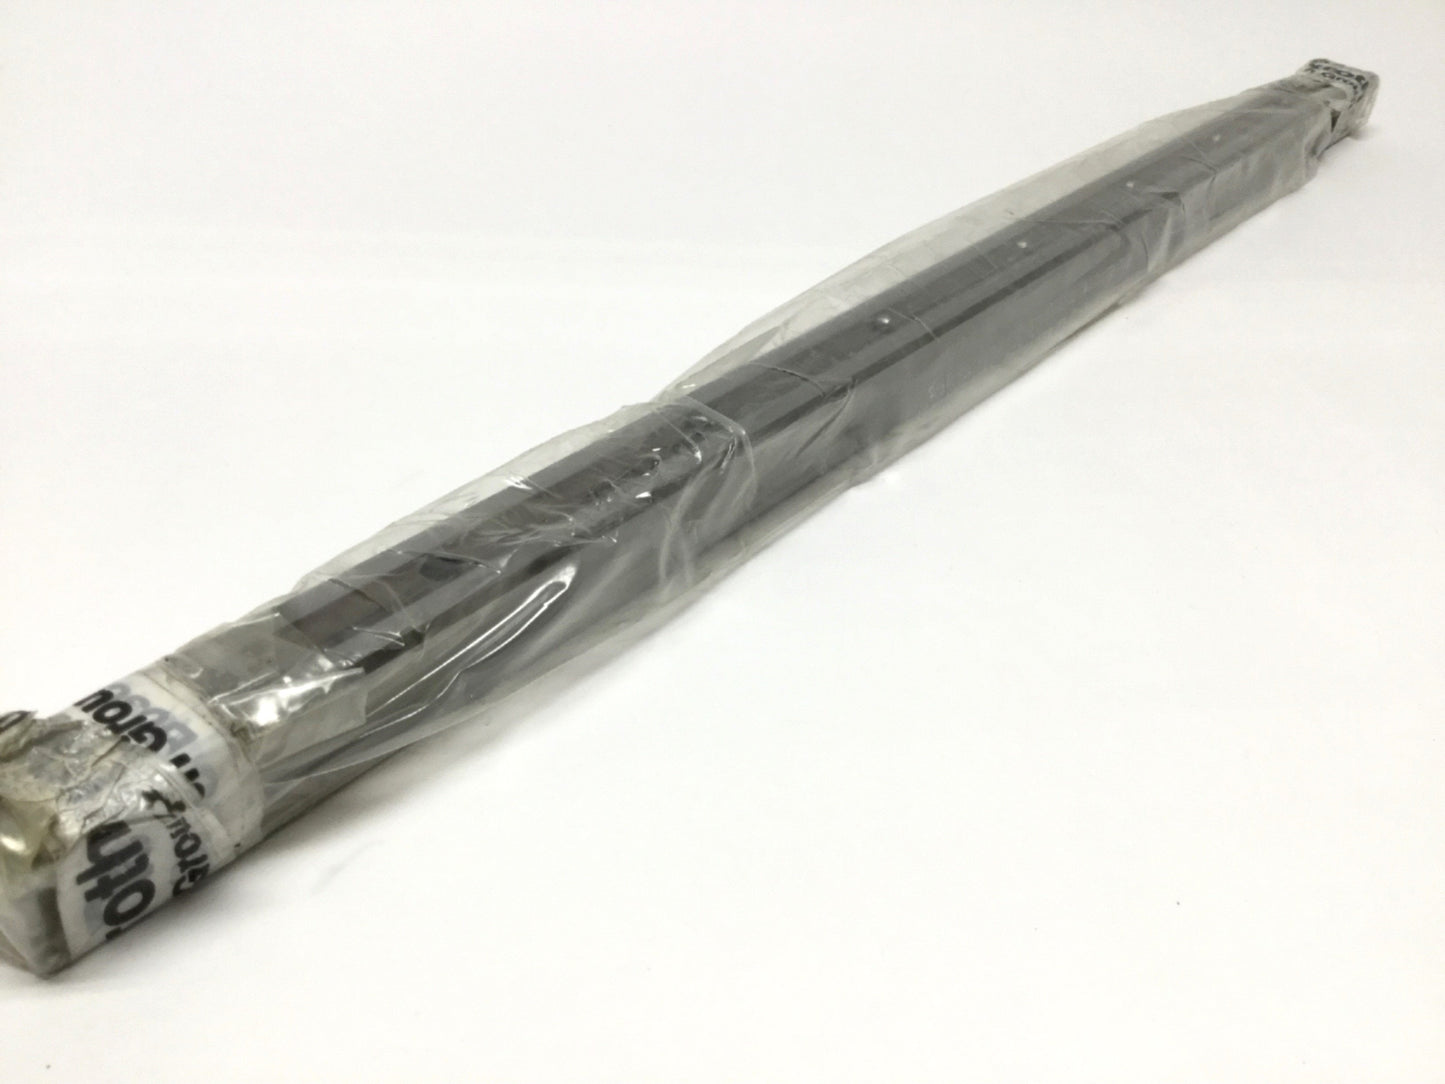 New Bosch Rexroth R204580431 Stainless Steel Ball Guide Rail, 20mm Wide, 500mm Long